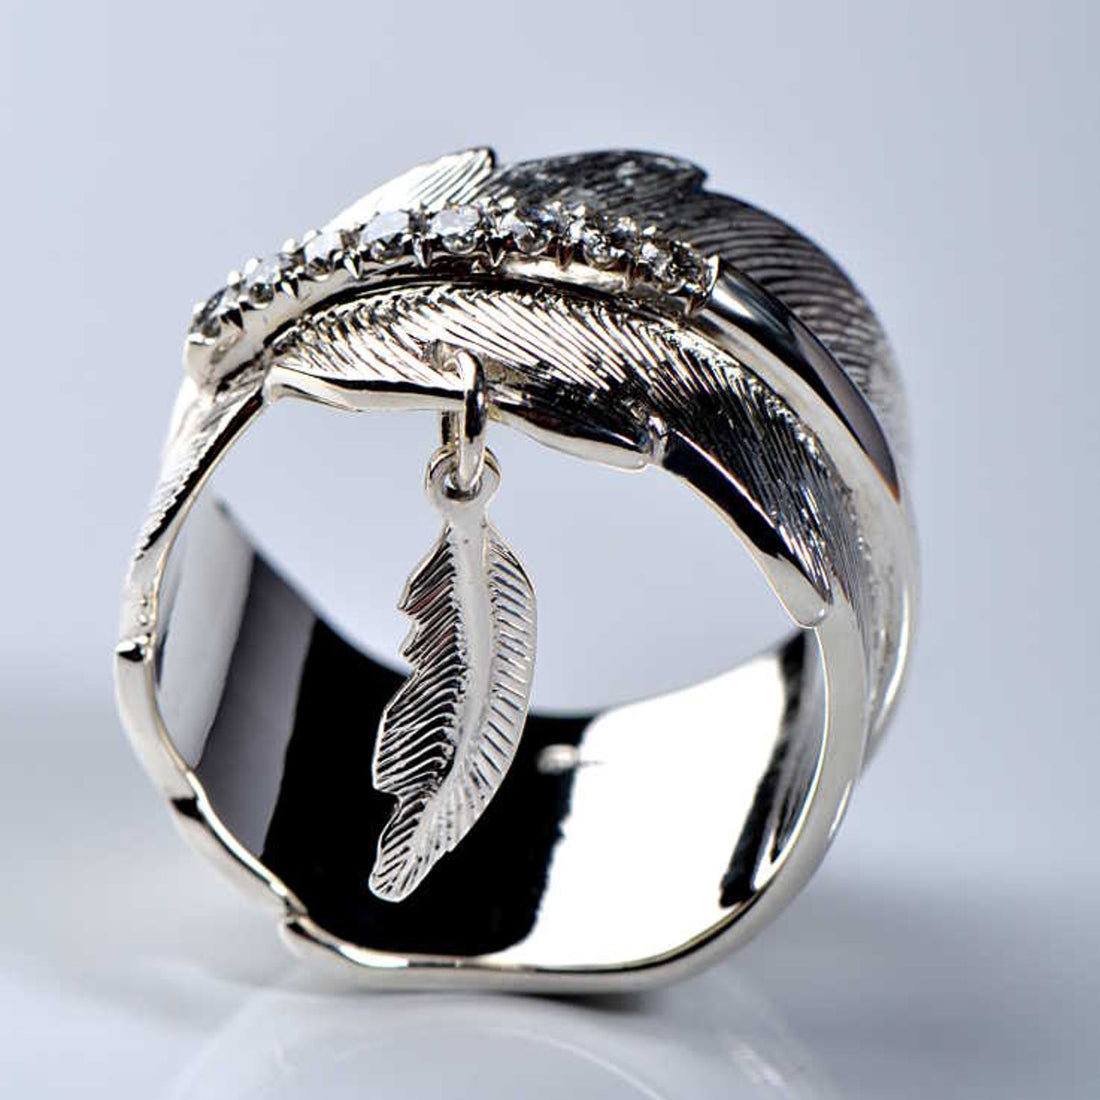 Charming handmade feather ring